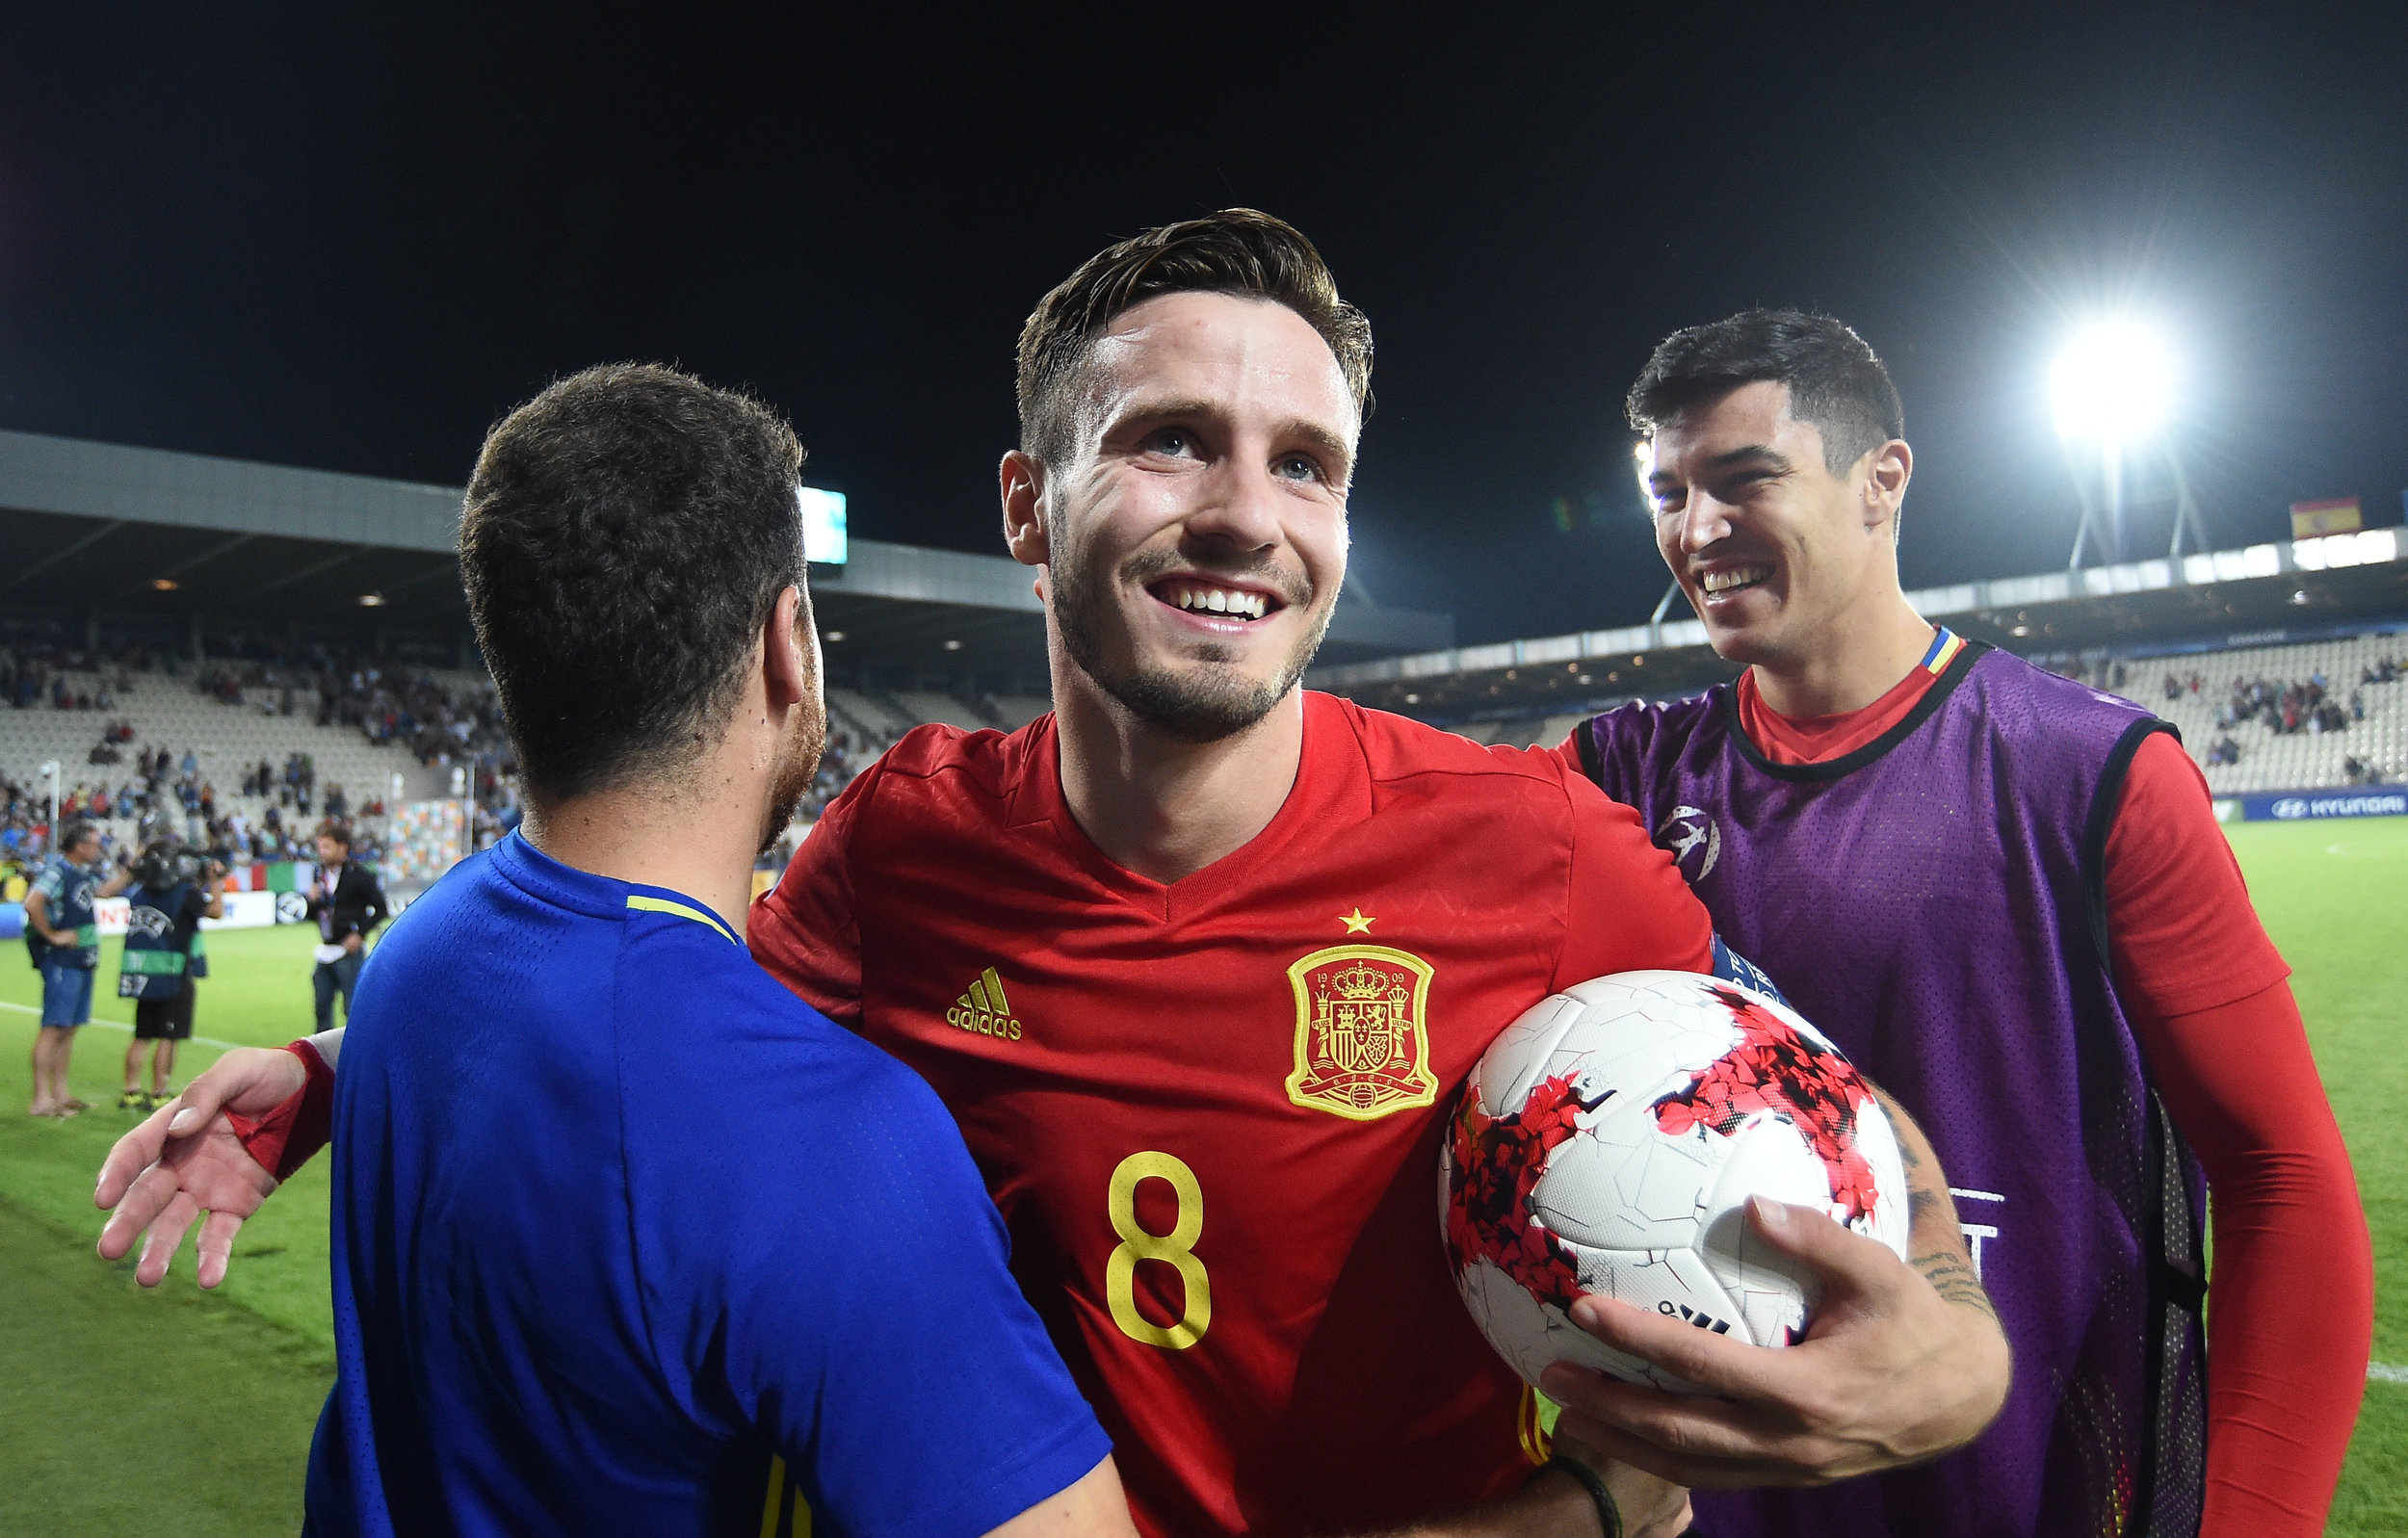  Spain's Saul earned the game ball with his hat trick against Italy in Poland 2017 /  UEFA / Sportsfile  